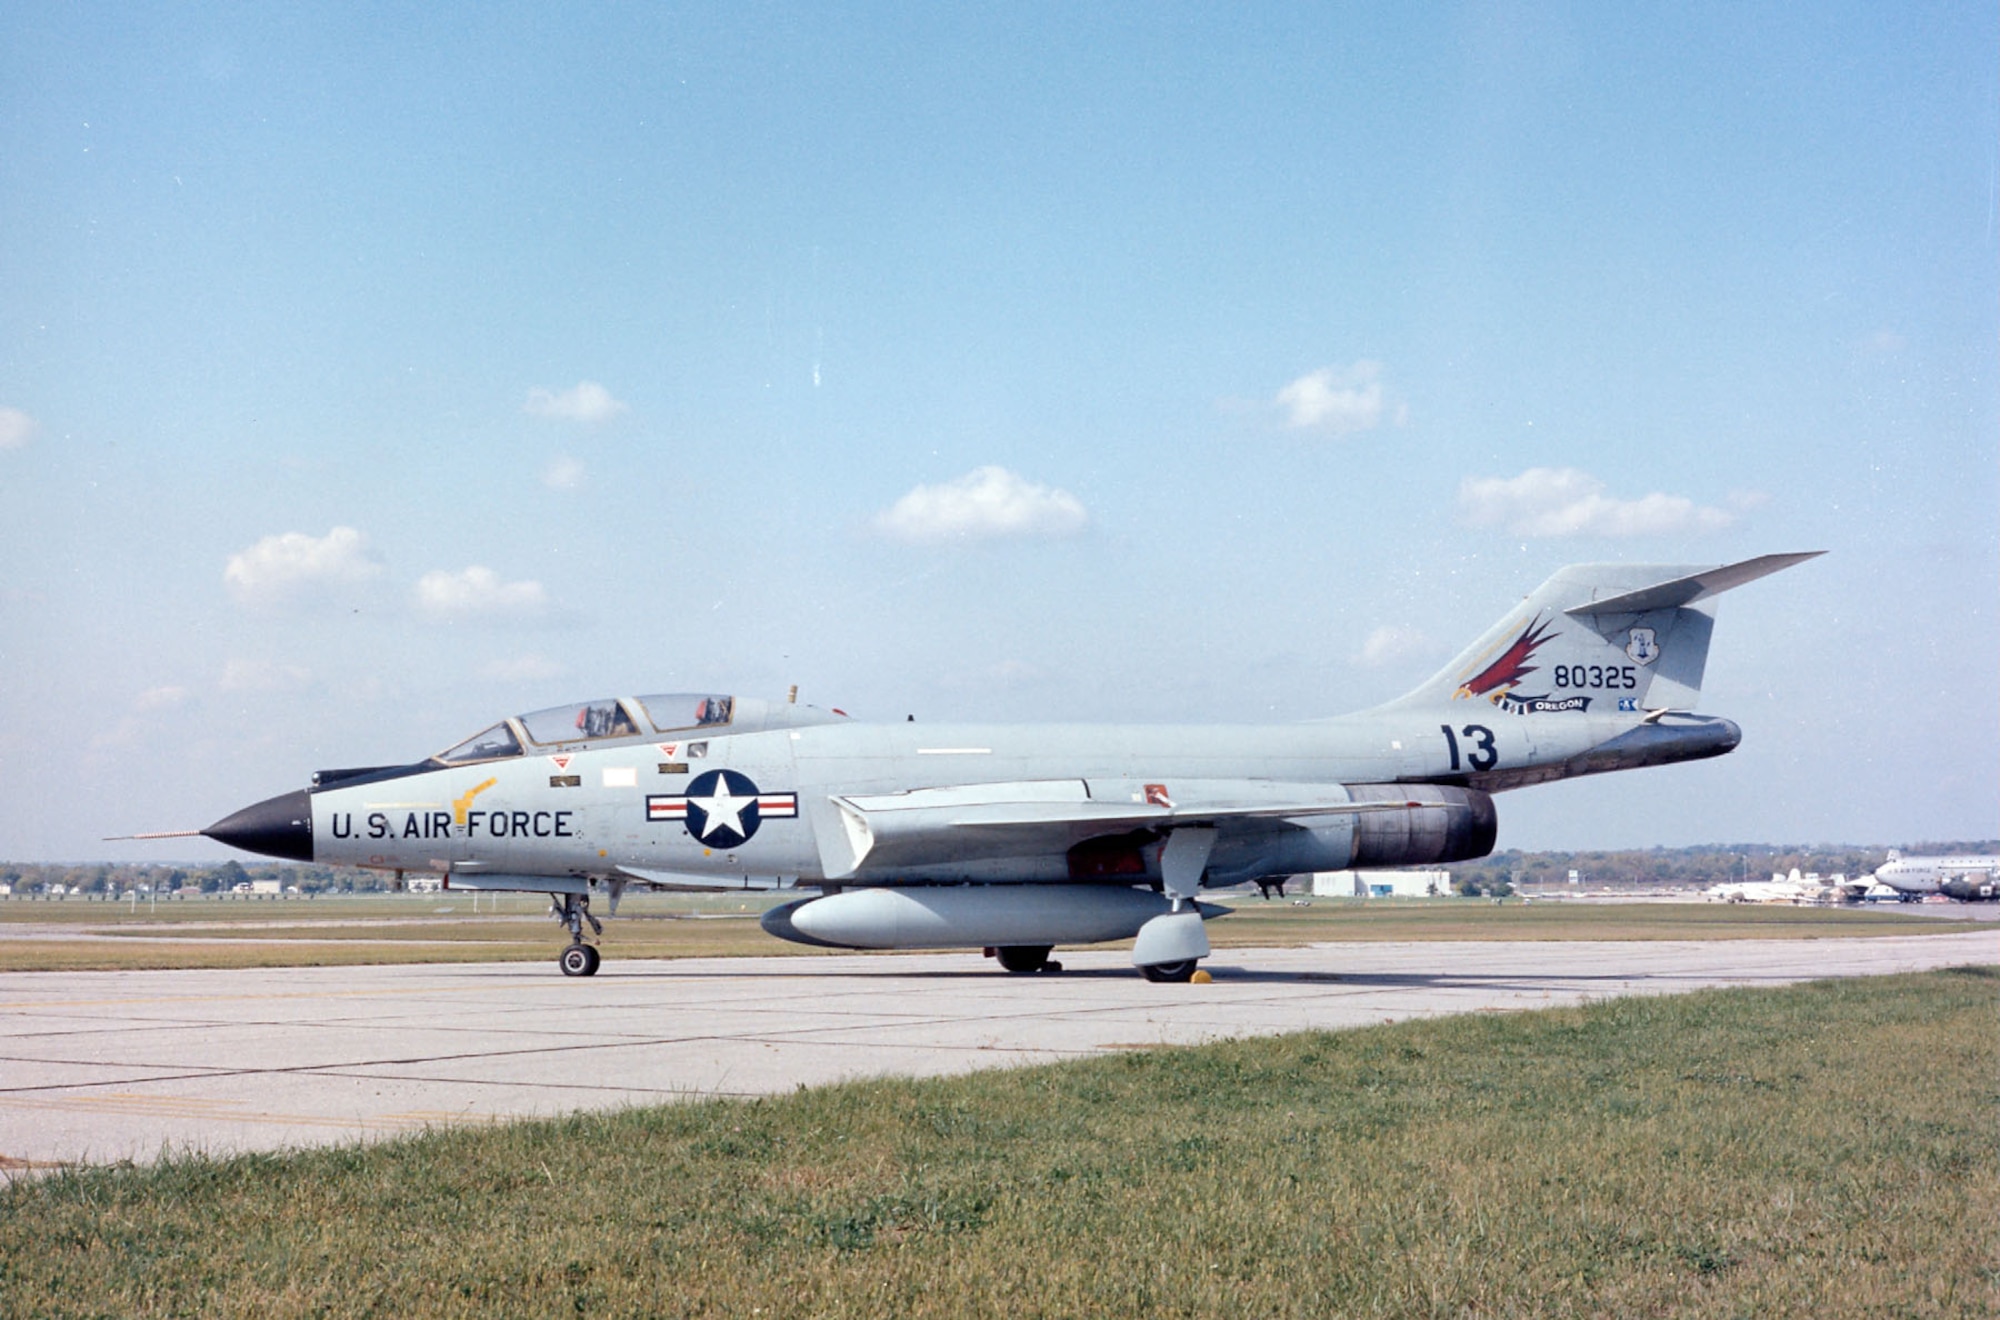 DAYTON, Ohio -- McDonnell F-101B Voodoo at the National Museum of the United States Air Force. (U.S. Air Force photo)